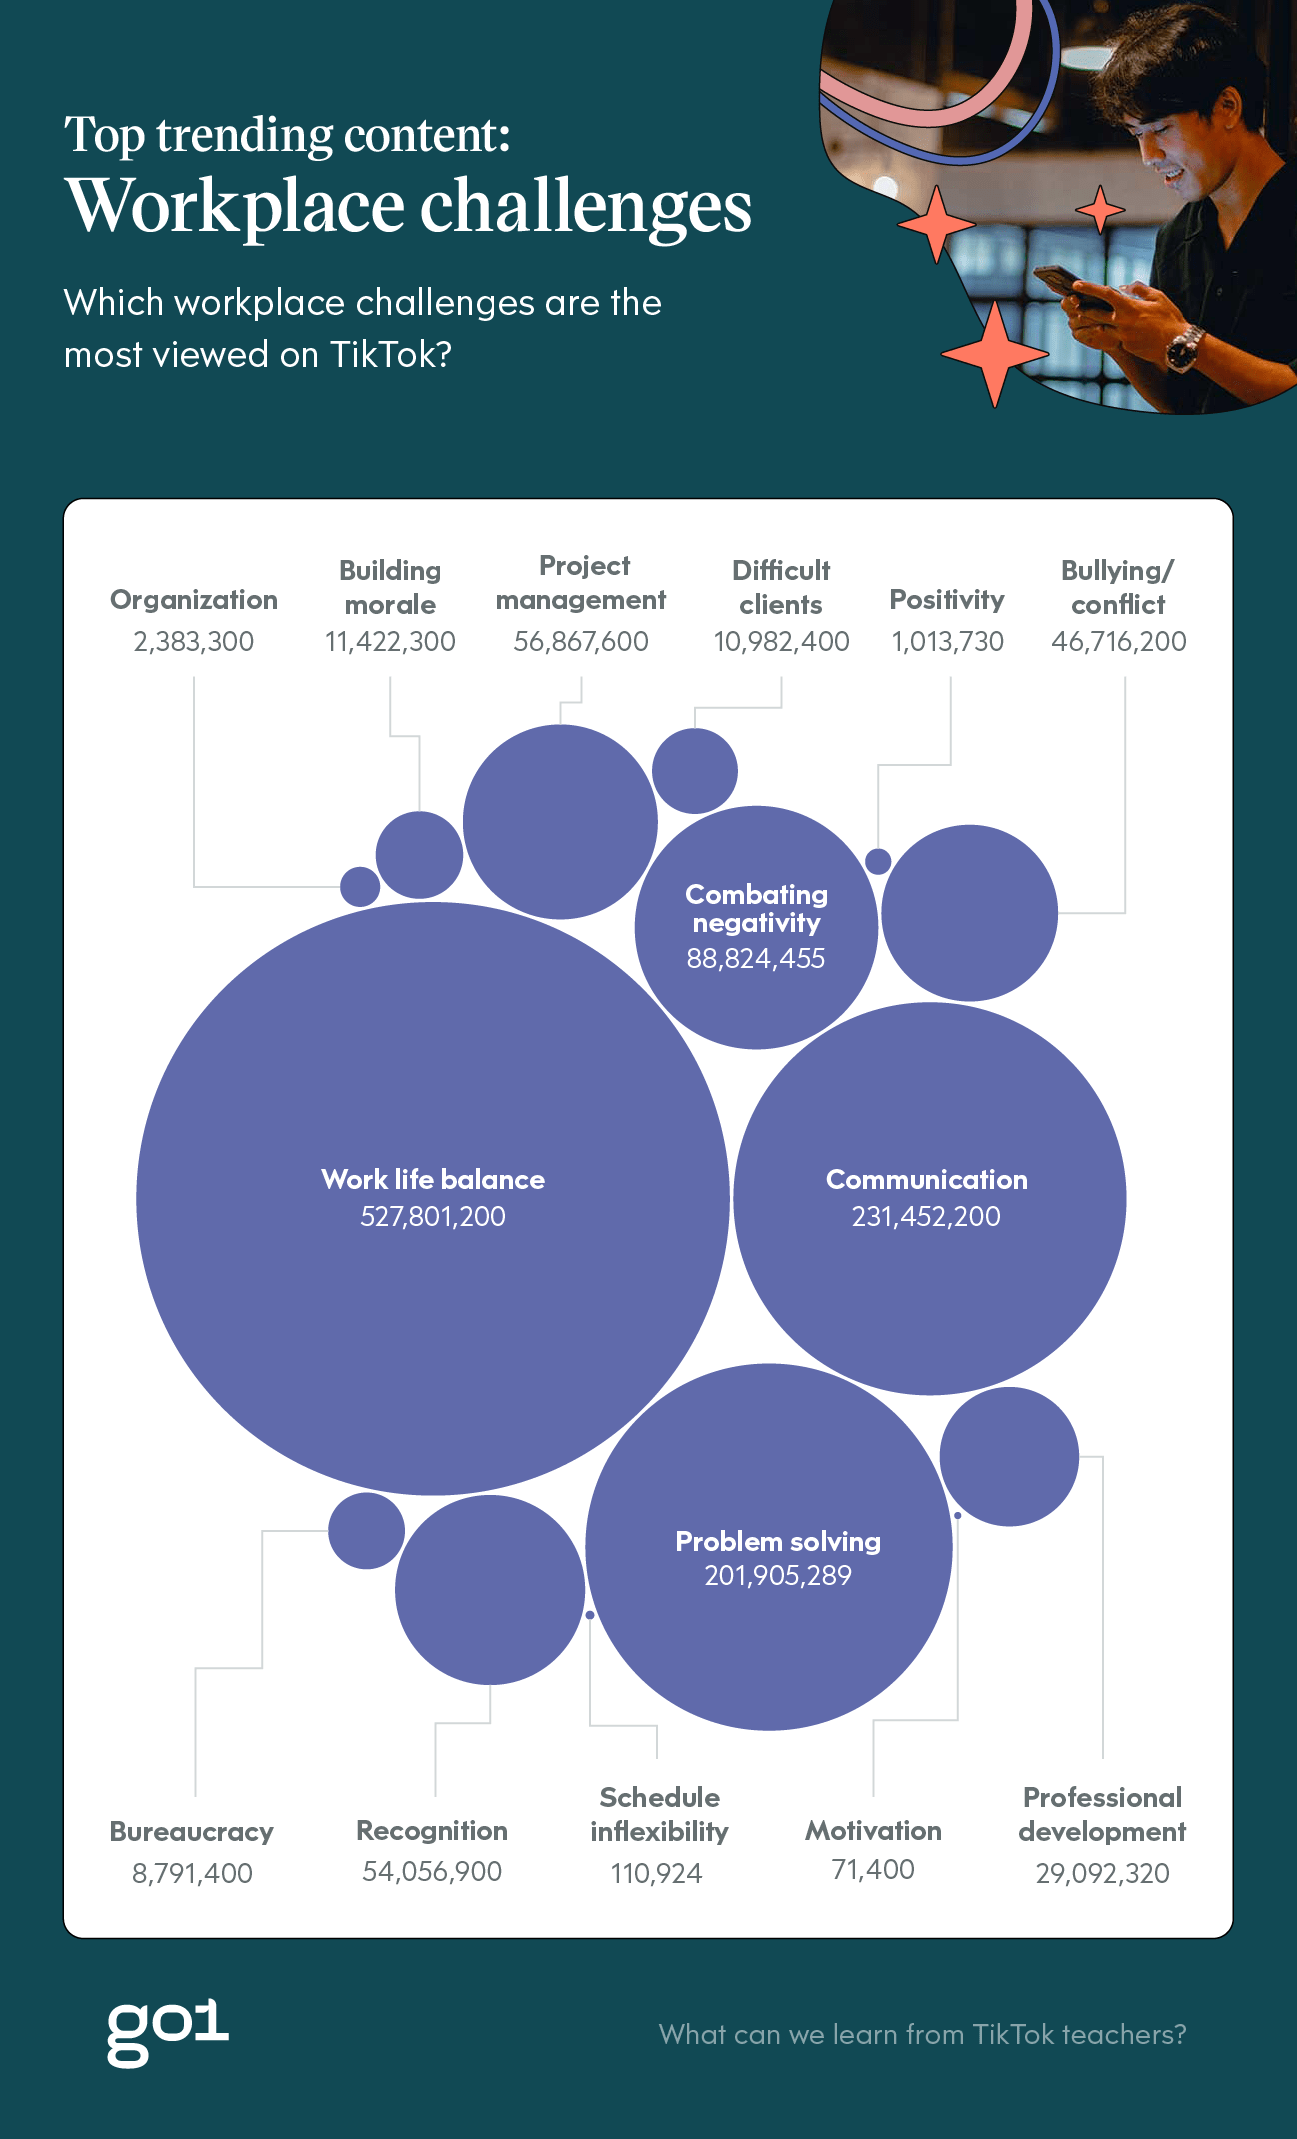 A bubble chart displaying the most viewed workplace challenges on TikTok